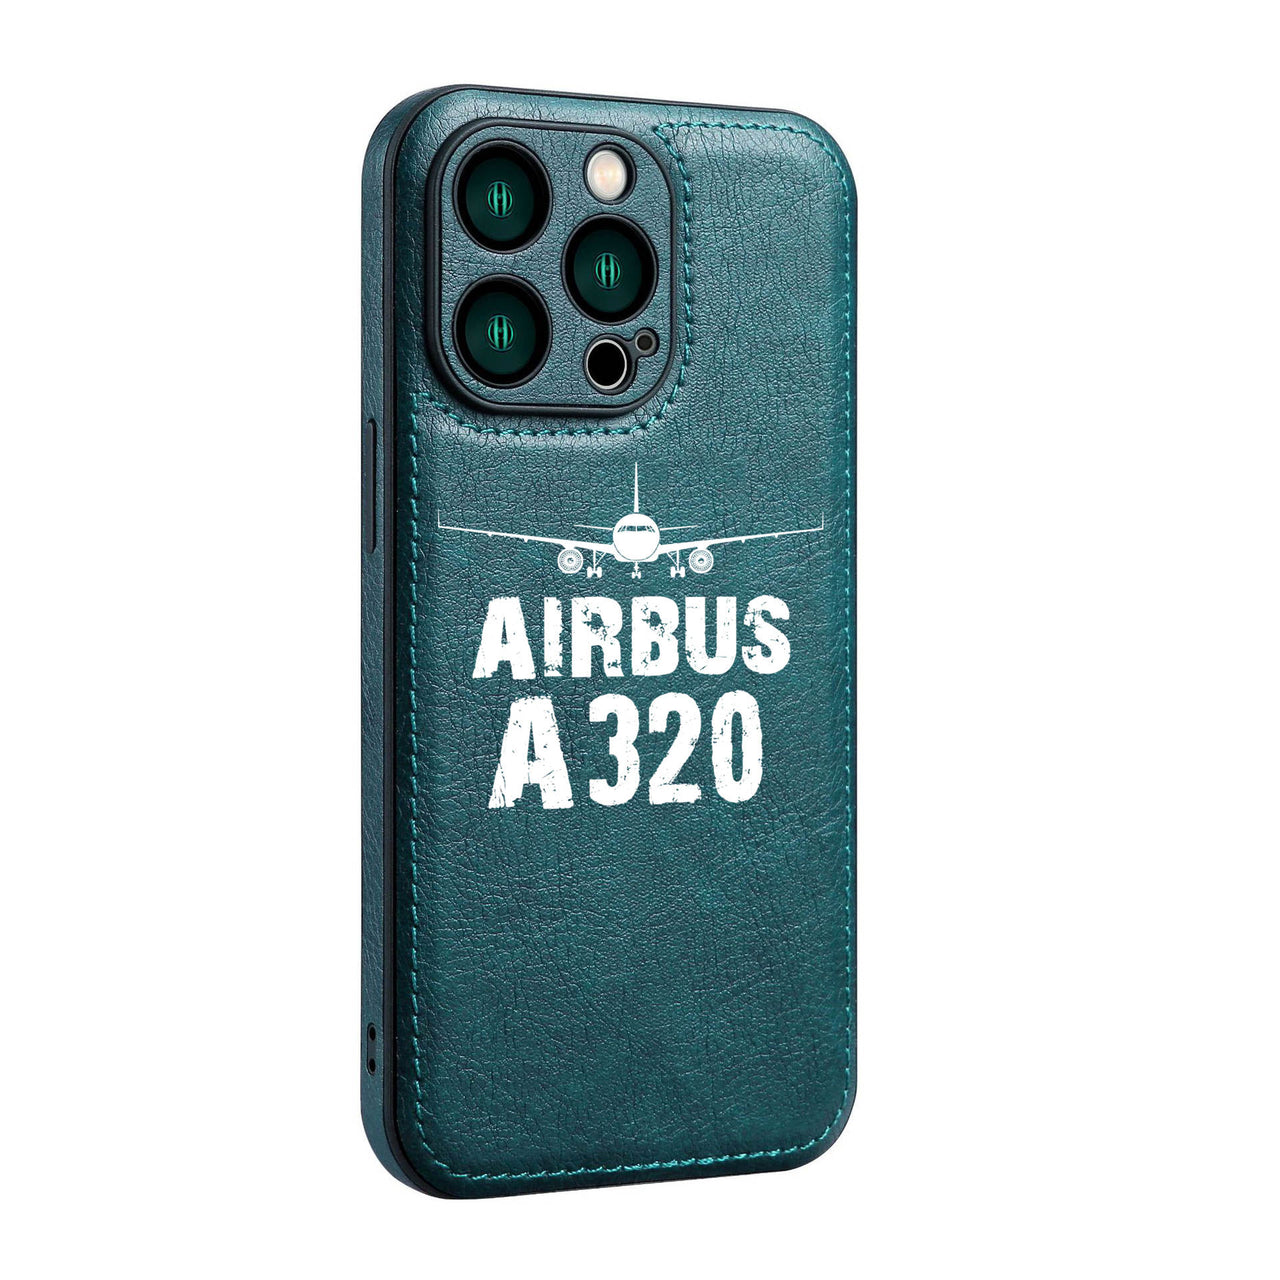 Airbus A320 & Plane Designed Leather iPhone Cases